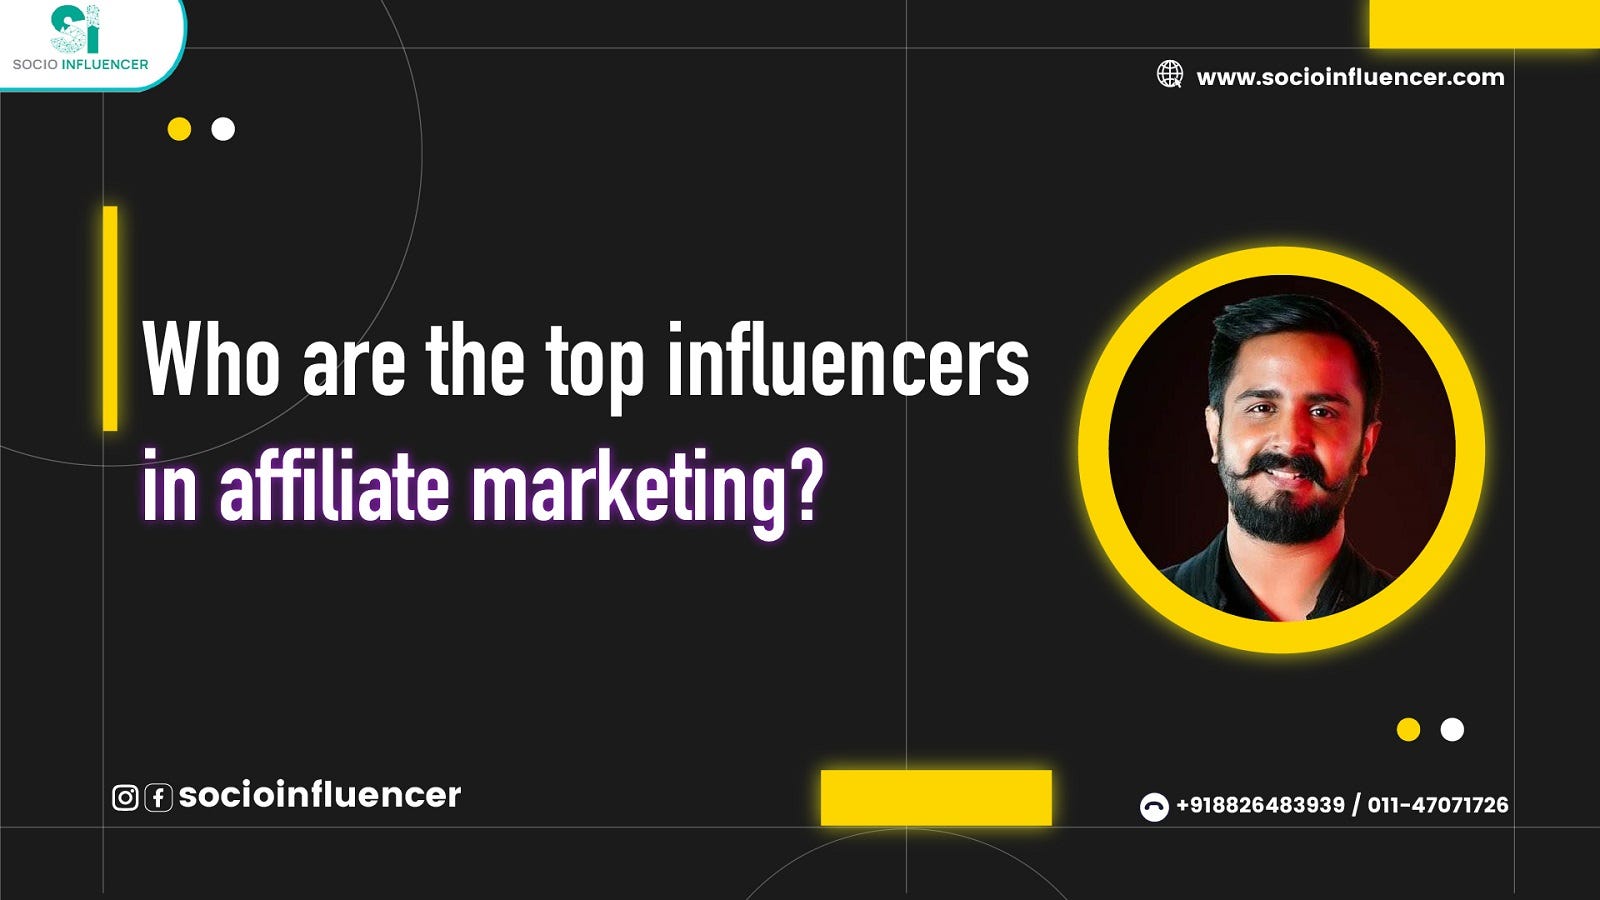 Affiliate Marketers: Who Are the Top Influencers?